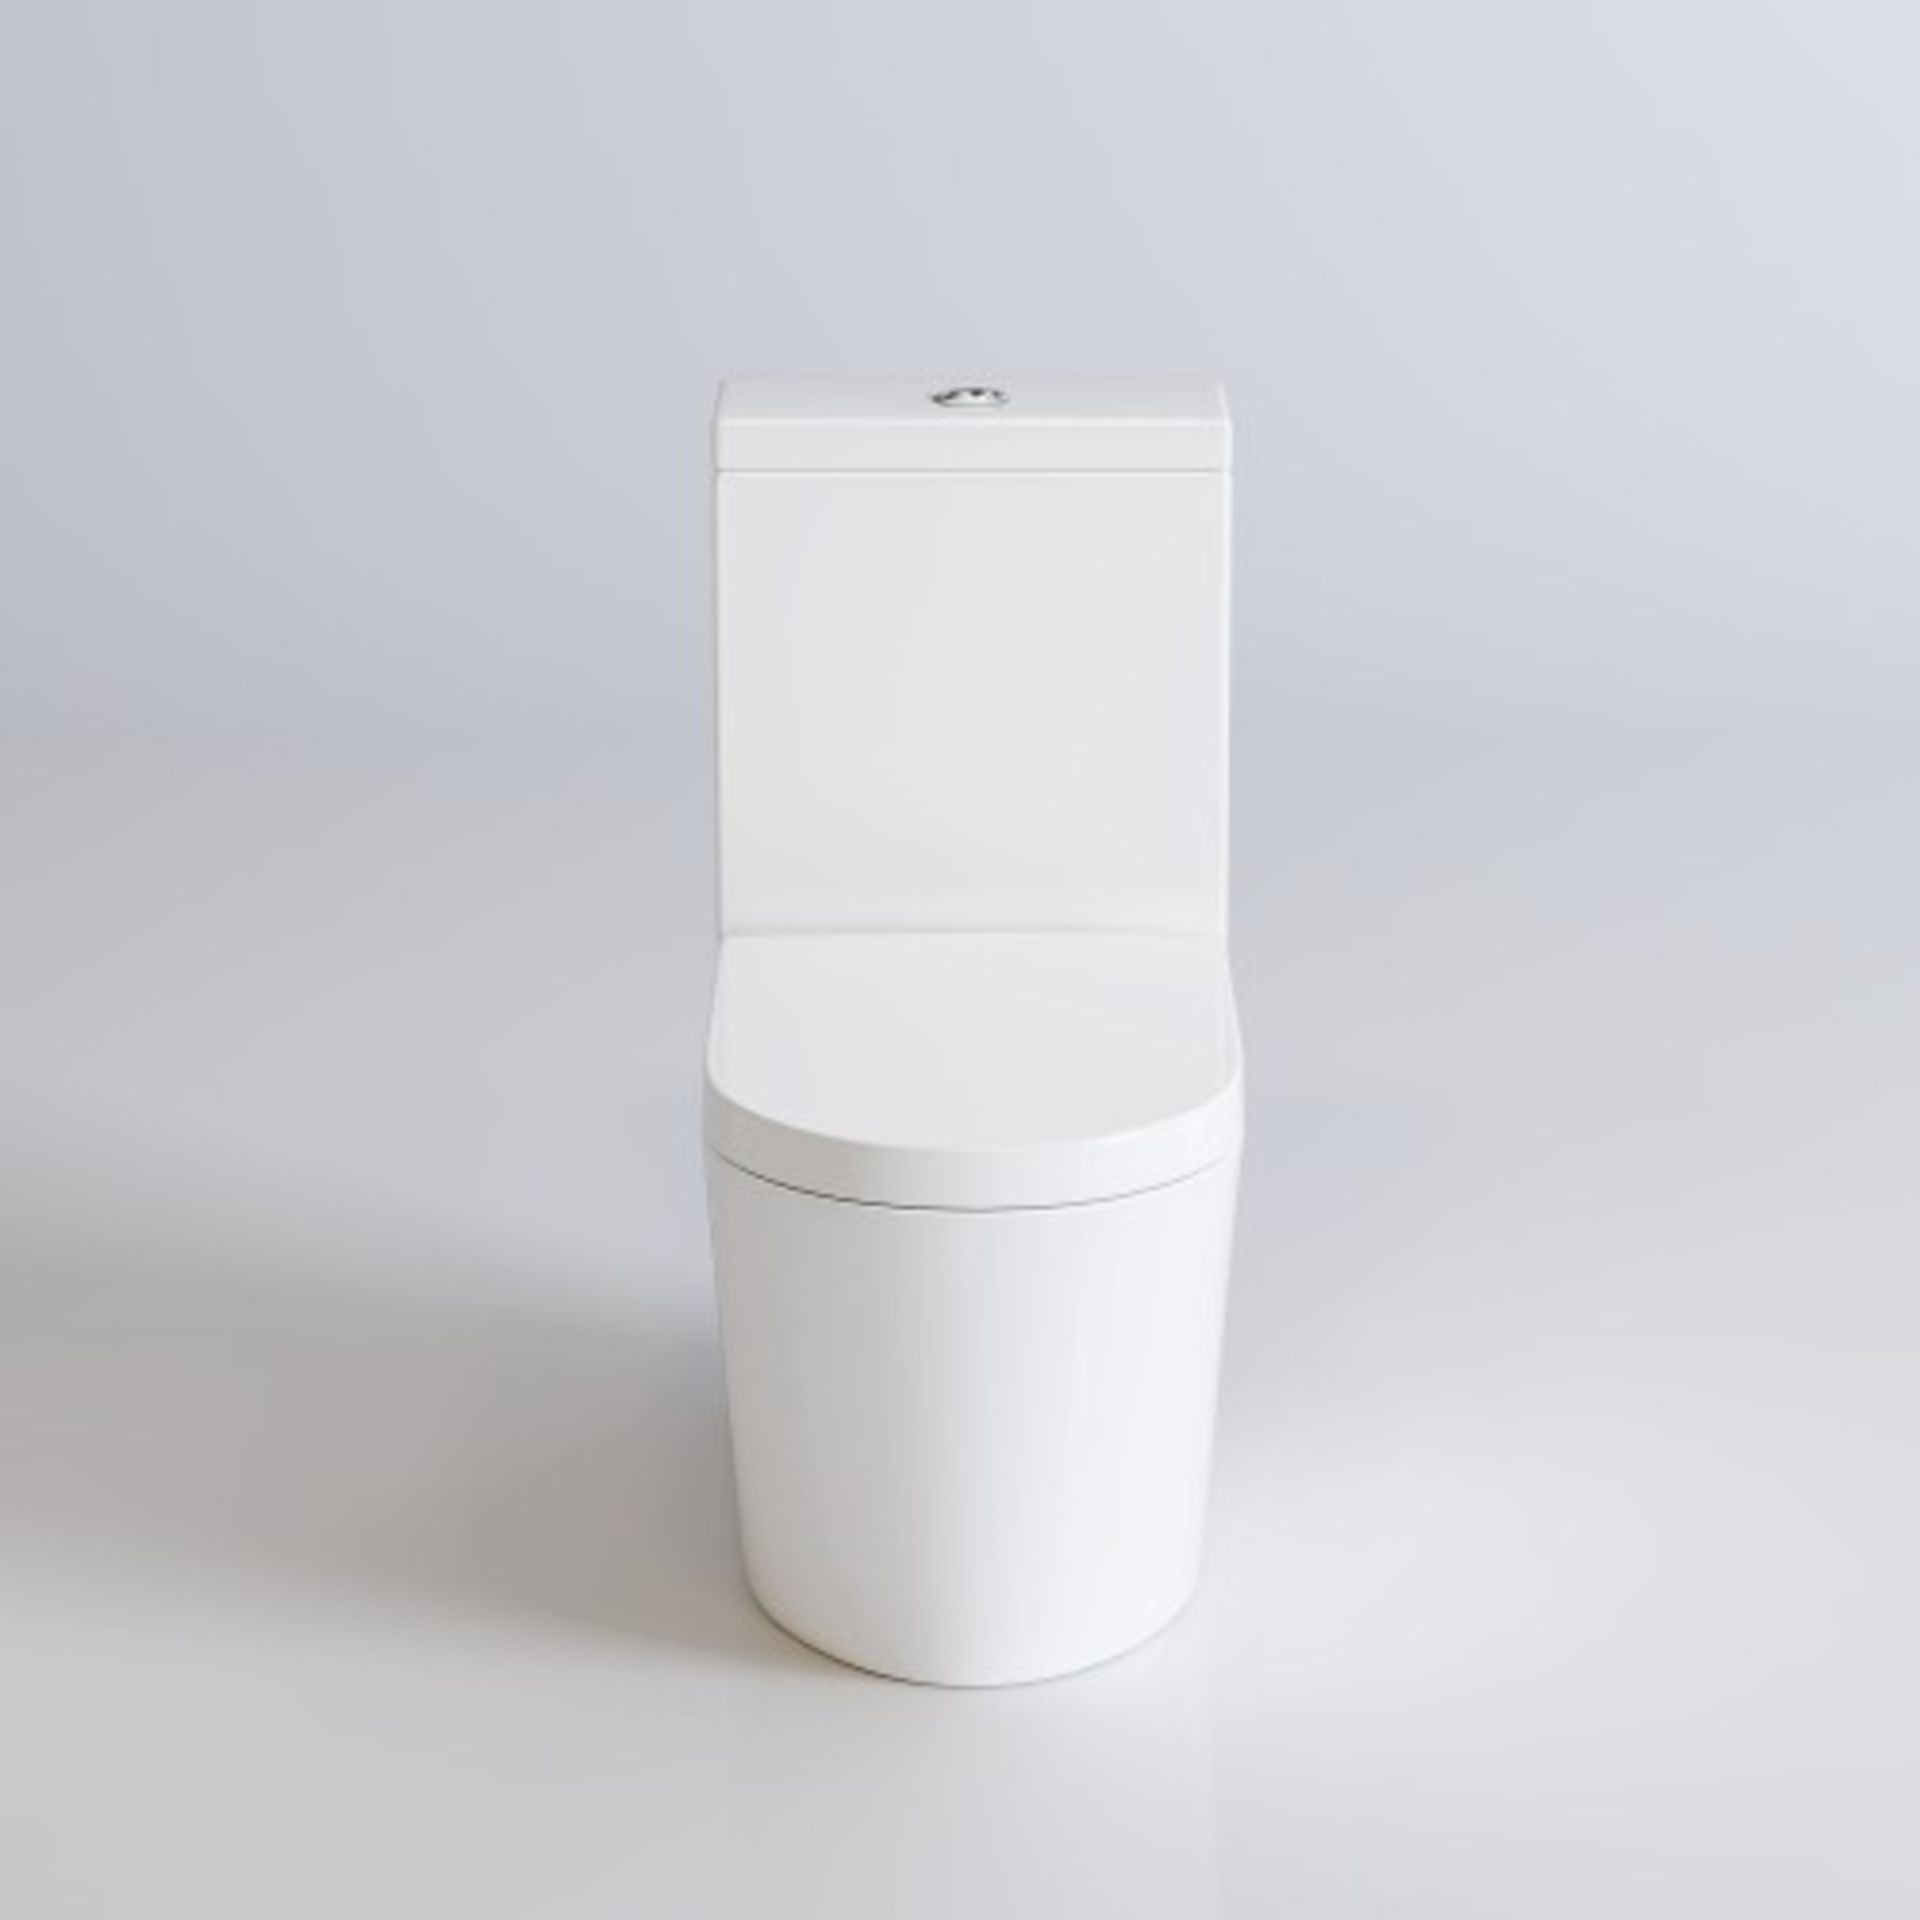 NEW Lyon II Close Coupled Toilet & Cistern inc Luxury Soft Close Seat. RRP £599.99.Lyon is a ... - Image 3 of 3